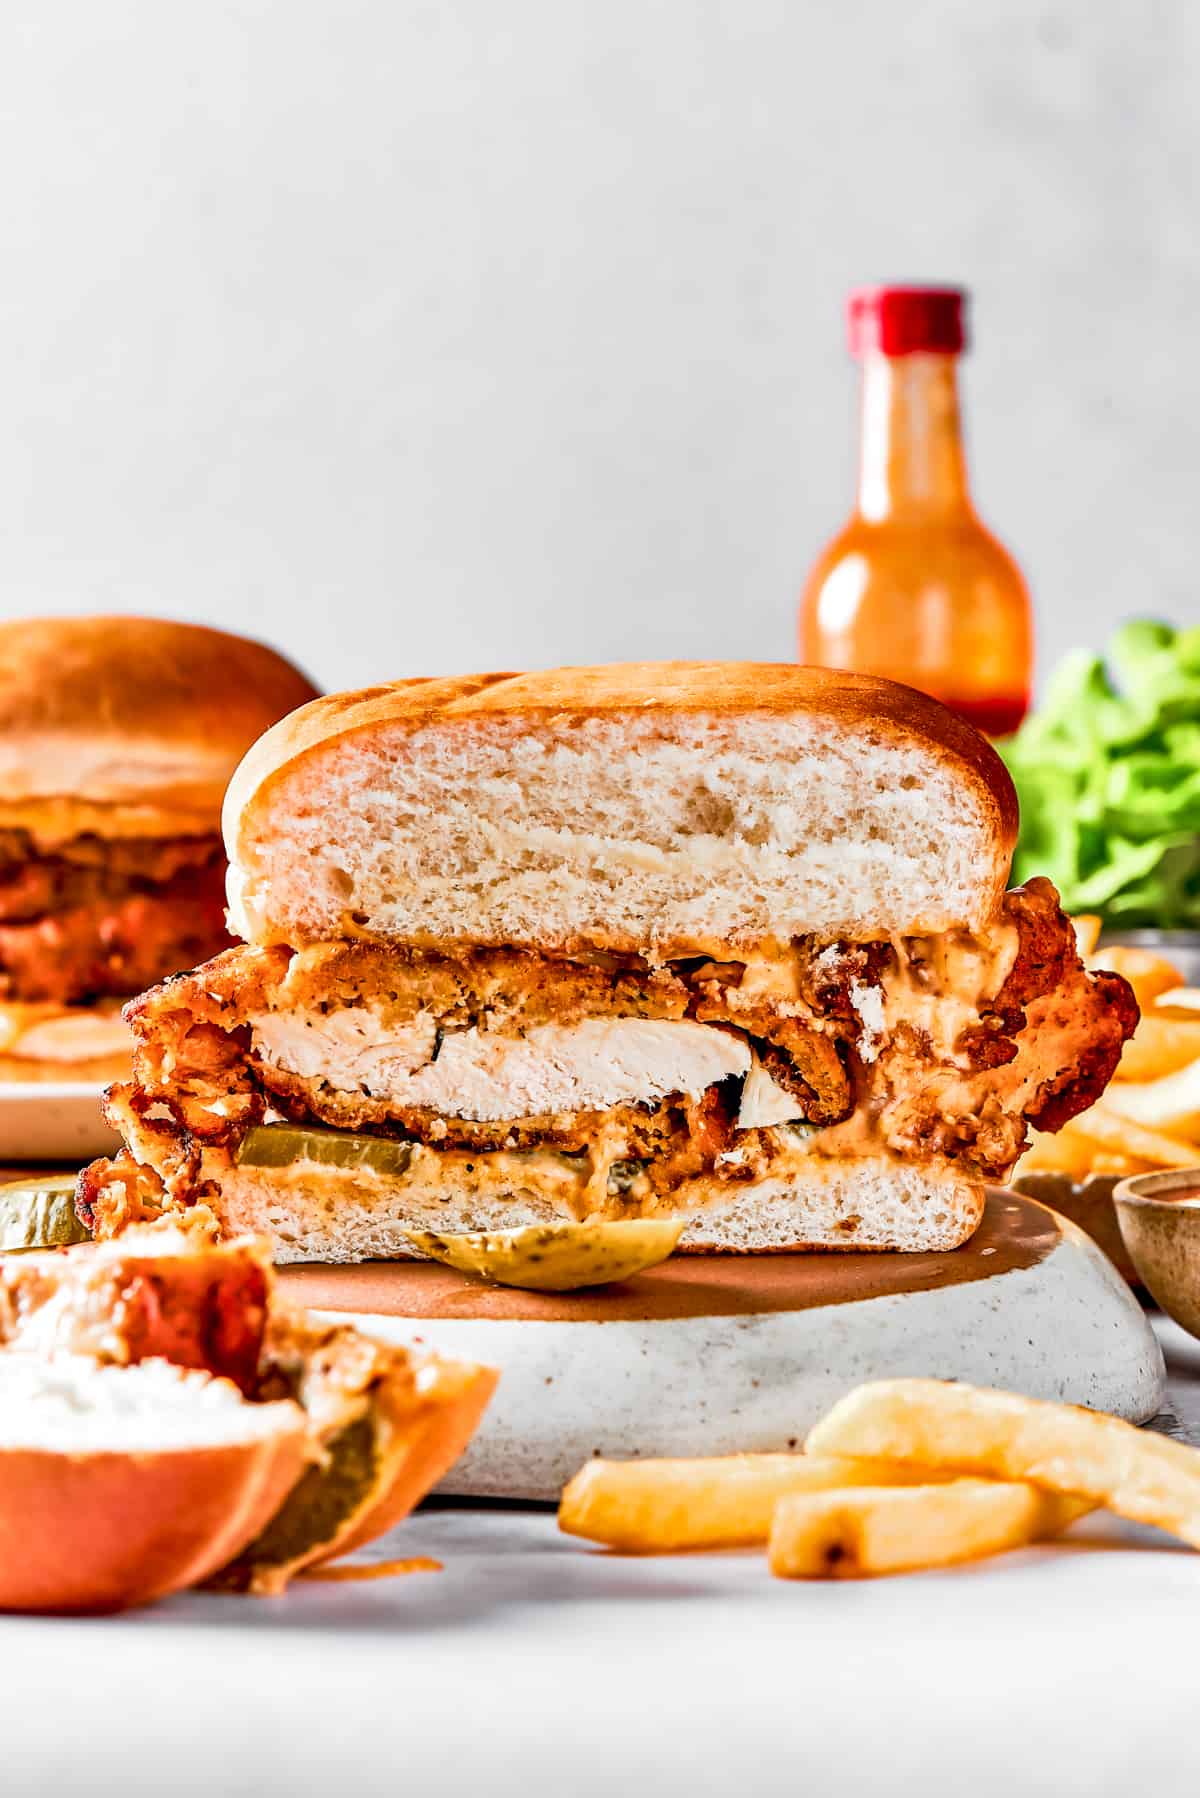 A homemade chicken sandwich cut in half to show the texture of the fried chicken and bun.